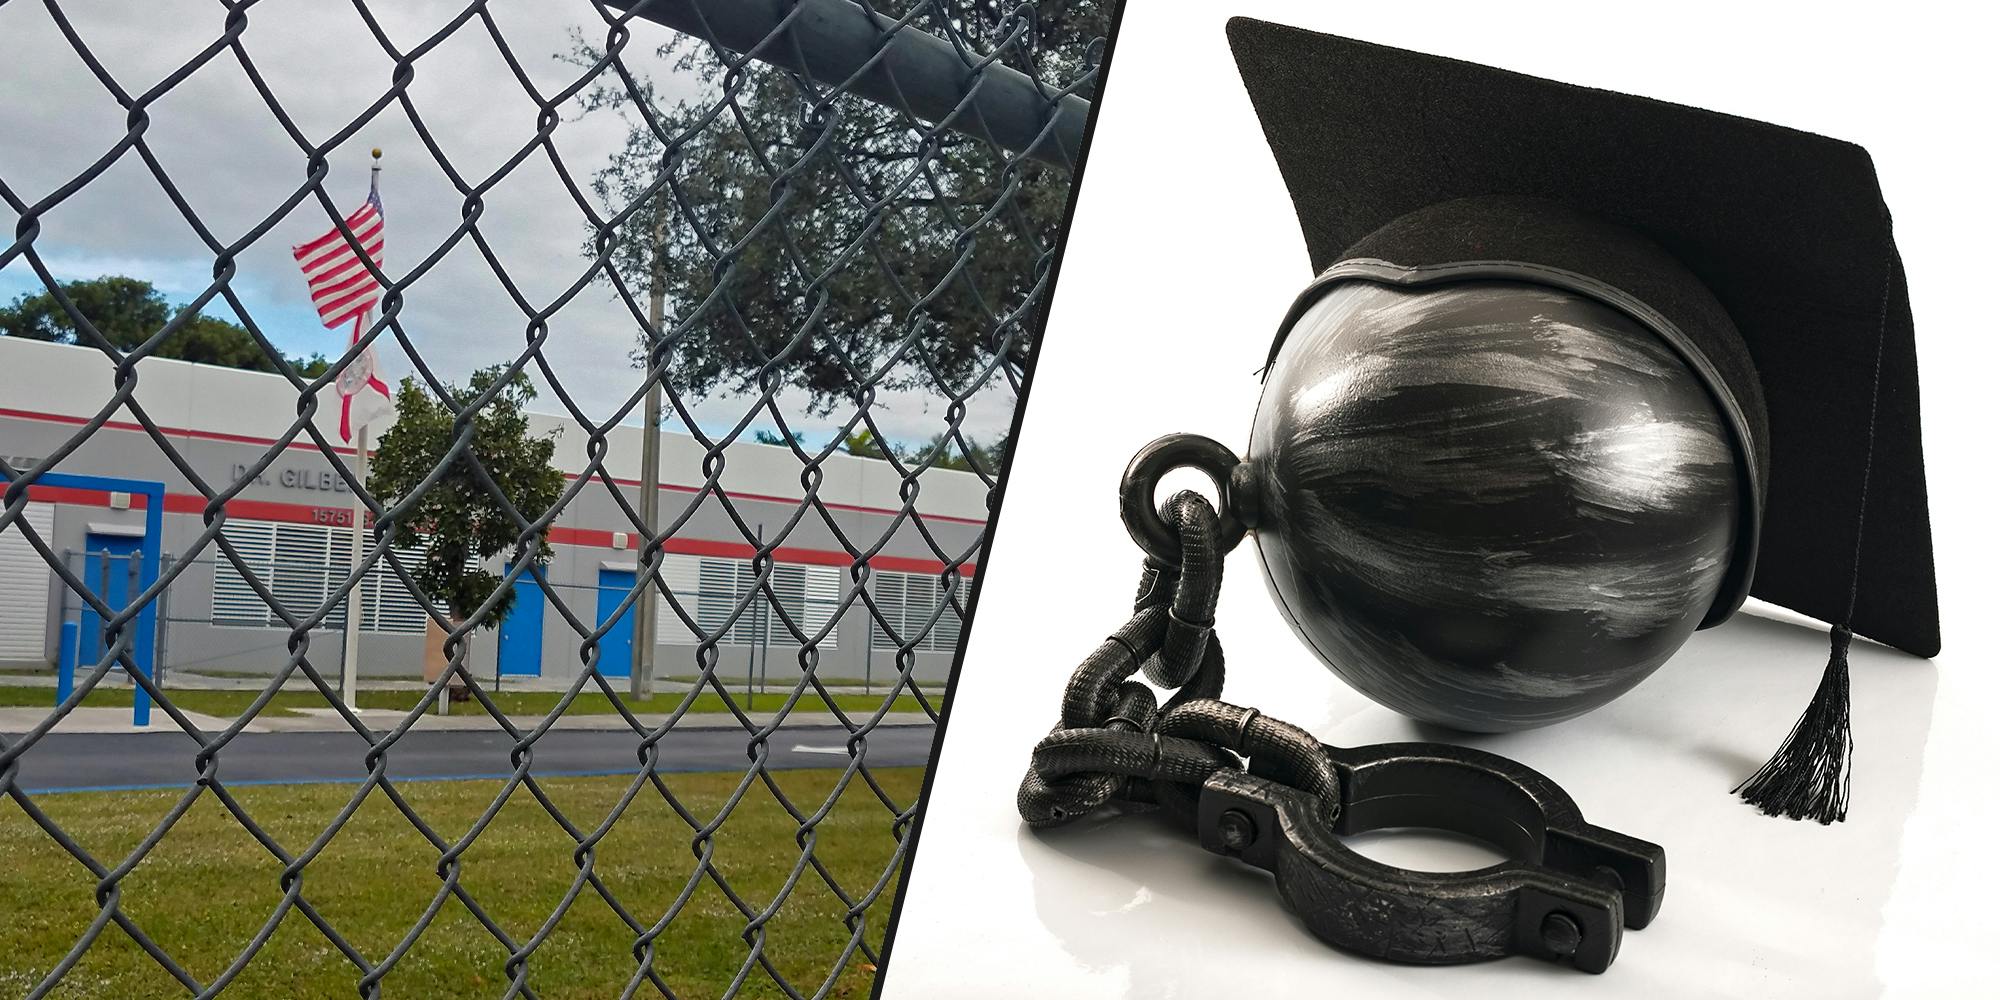 Florida’s Board of Ed decided to keep curriculum about benefits of slavery